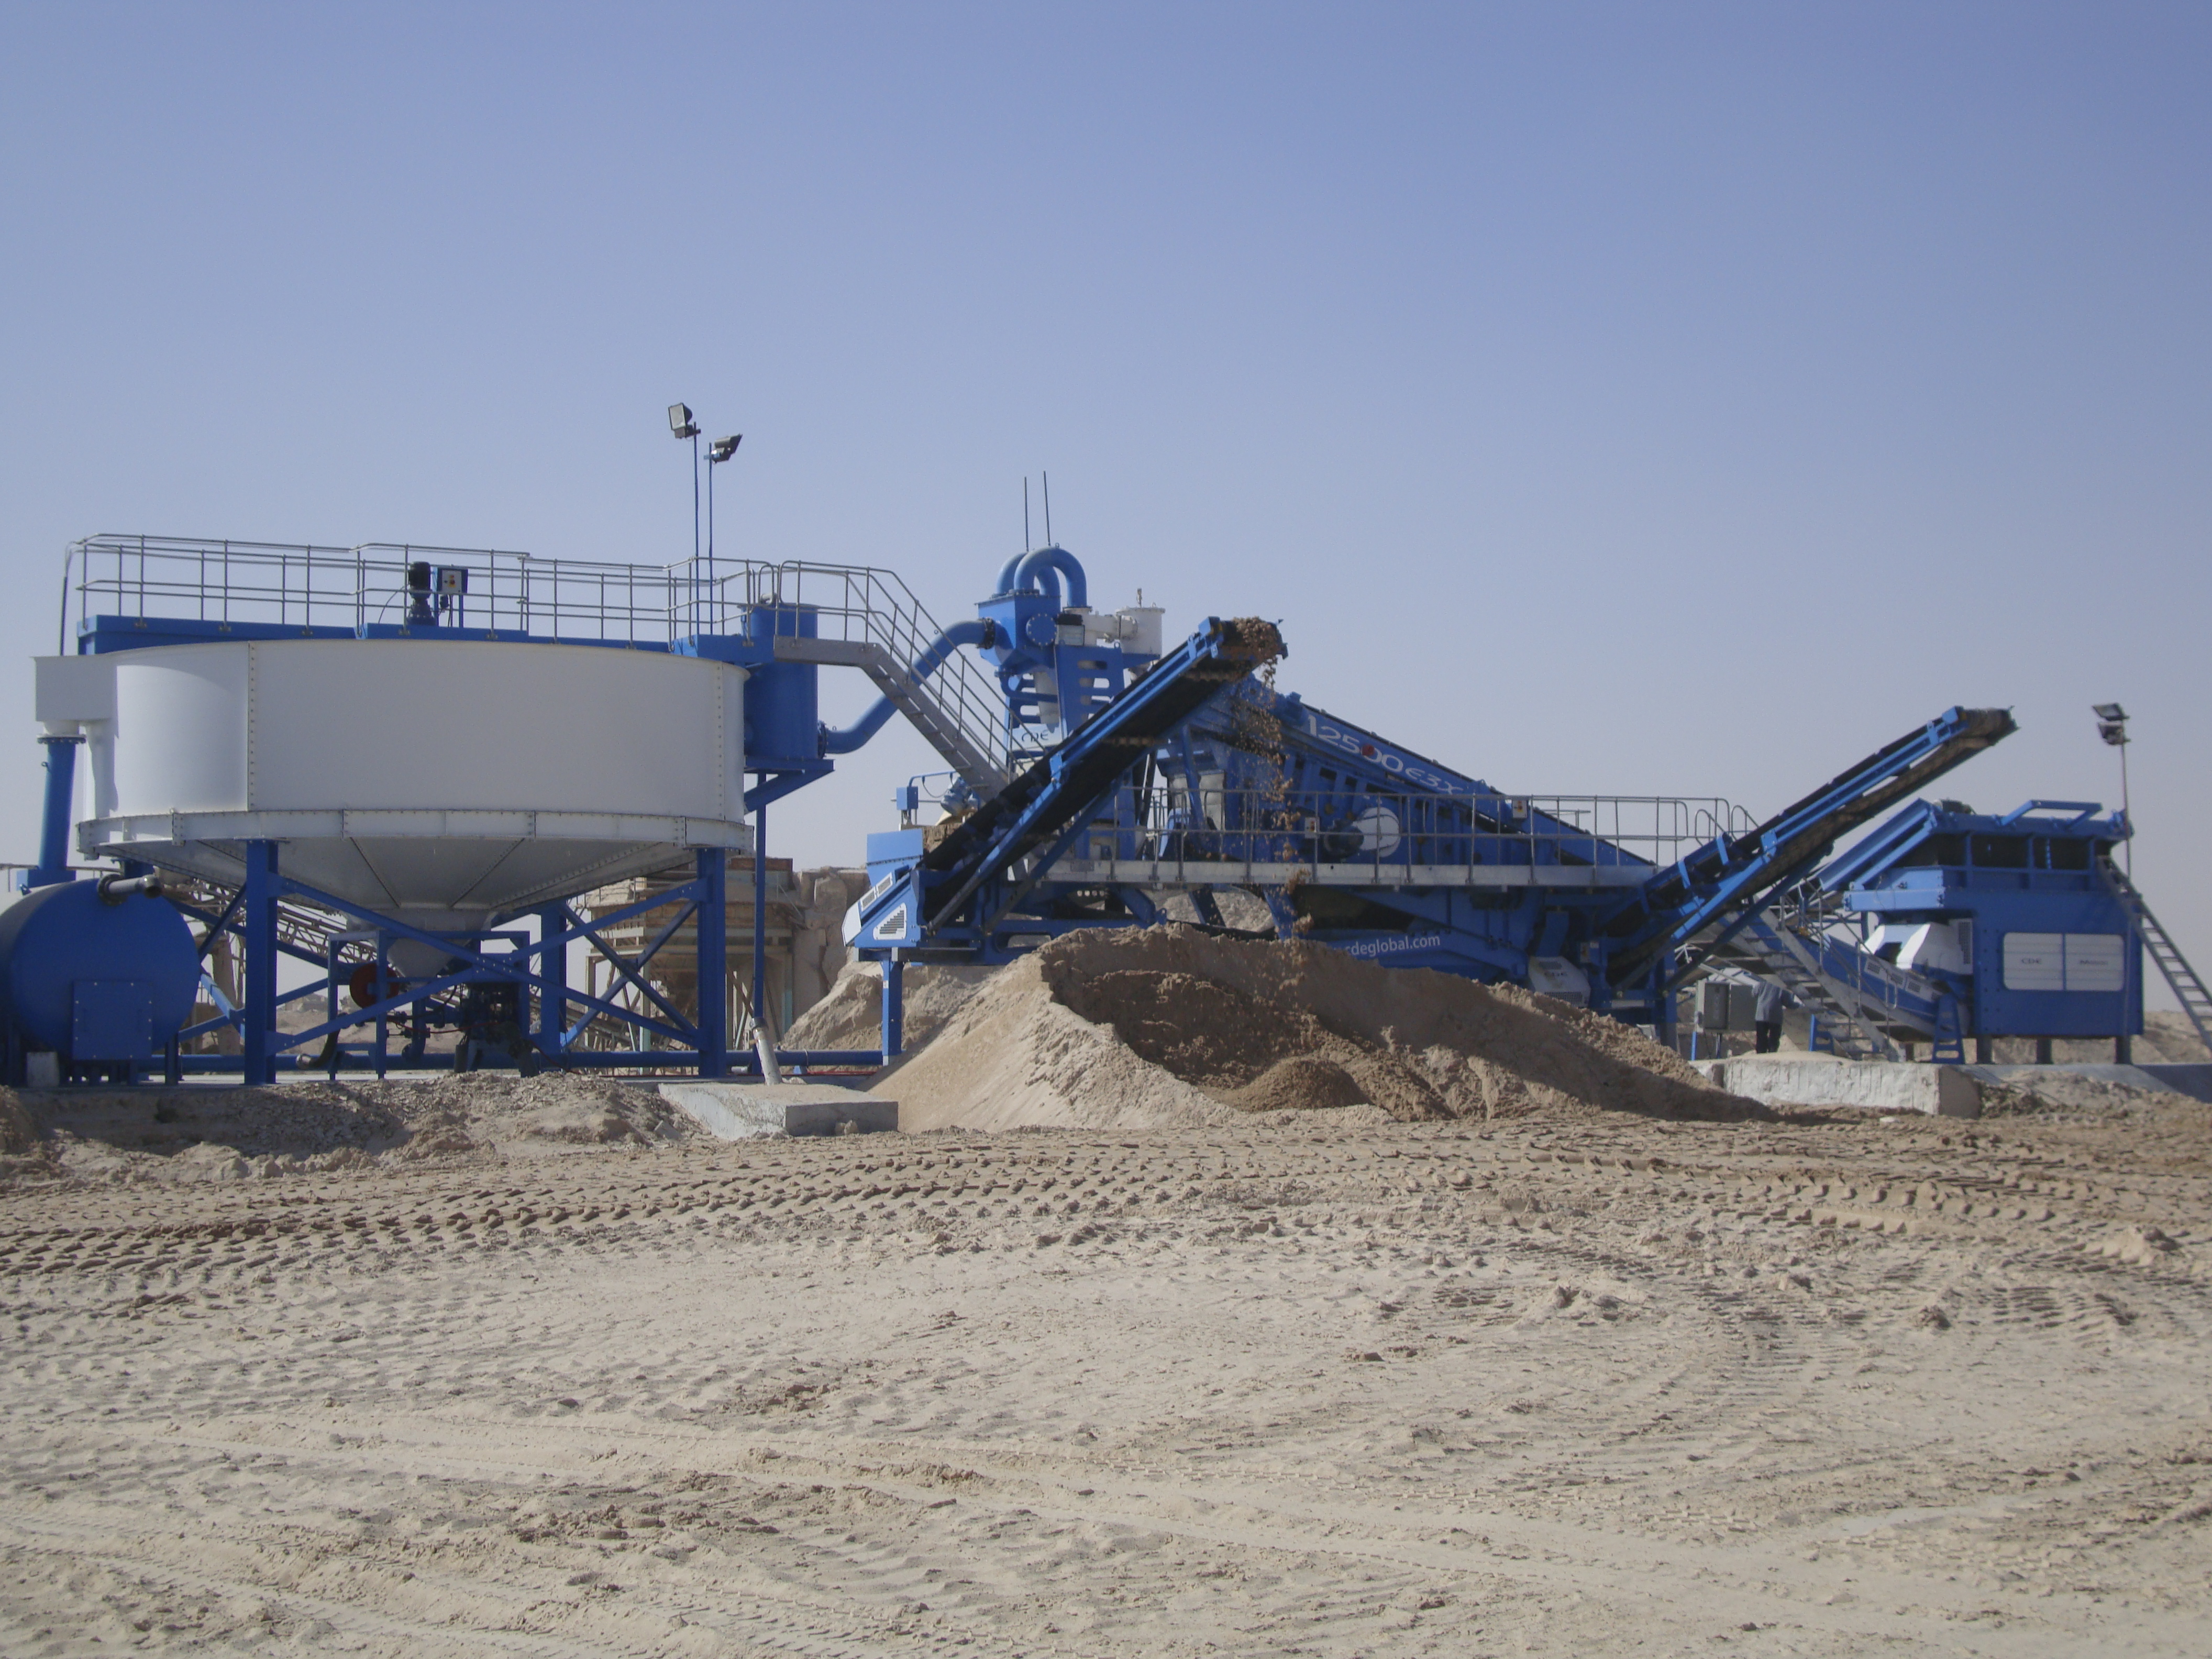 CDE Global’s M2500 mobile sand washing plant in Kuwait